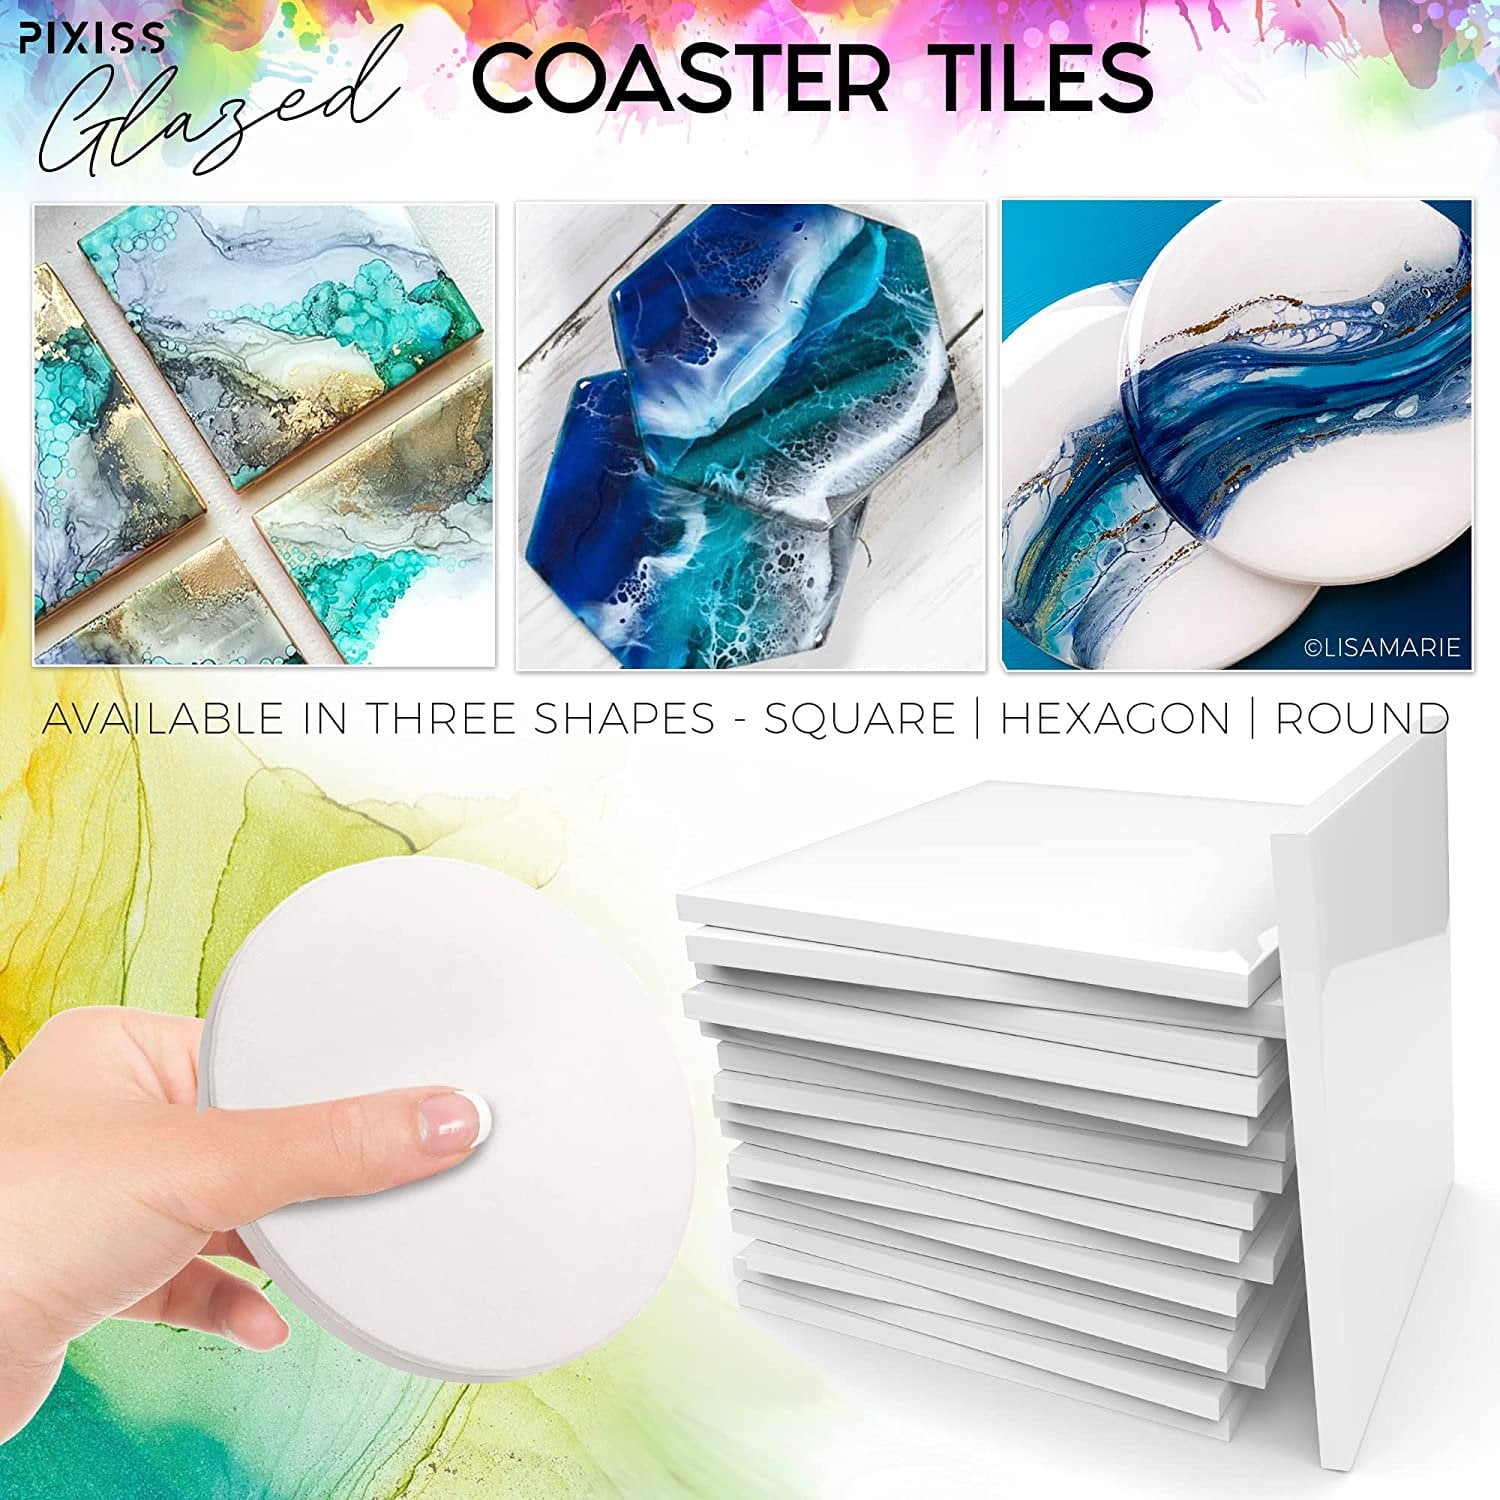 100 Pack Ceramic Tiles for Crafts Coasters, Ceramic White Tiles Unglazed  4x4 with Cork Backing Pads, Use with Alcohol Ink or Acrylic Pouring, DIY  Make Your Own …